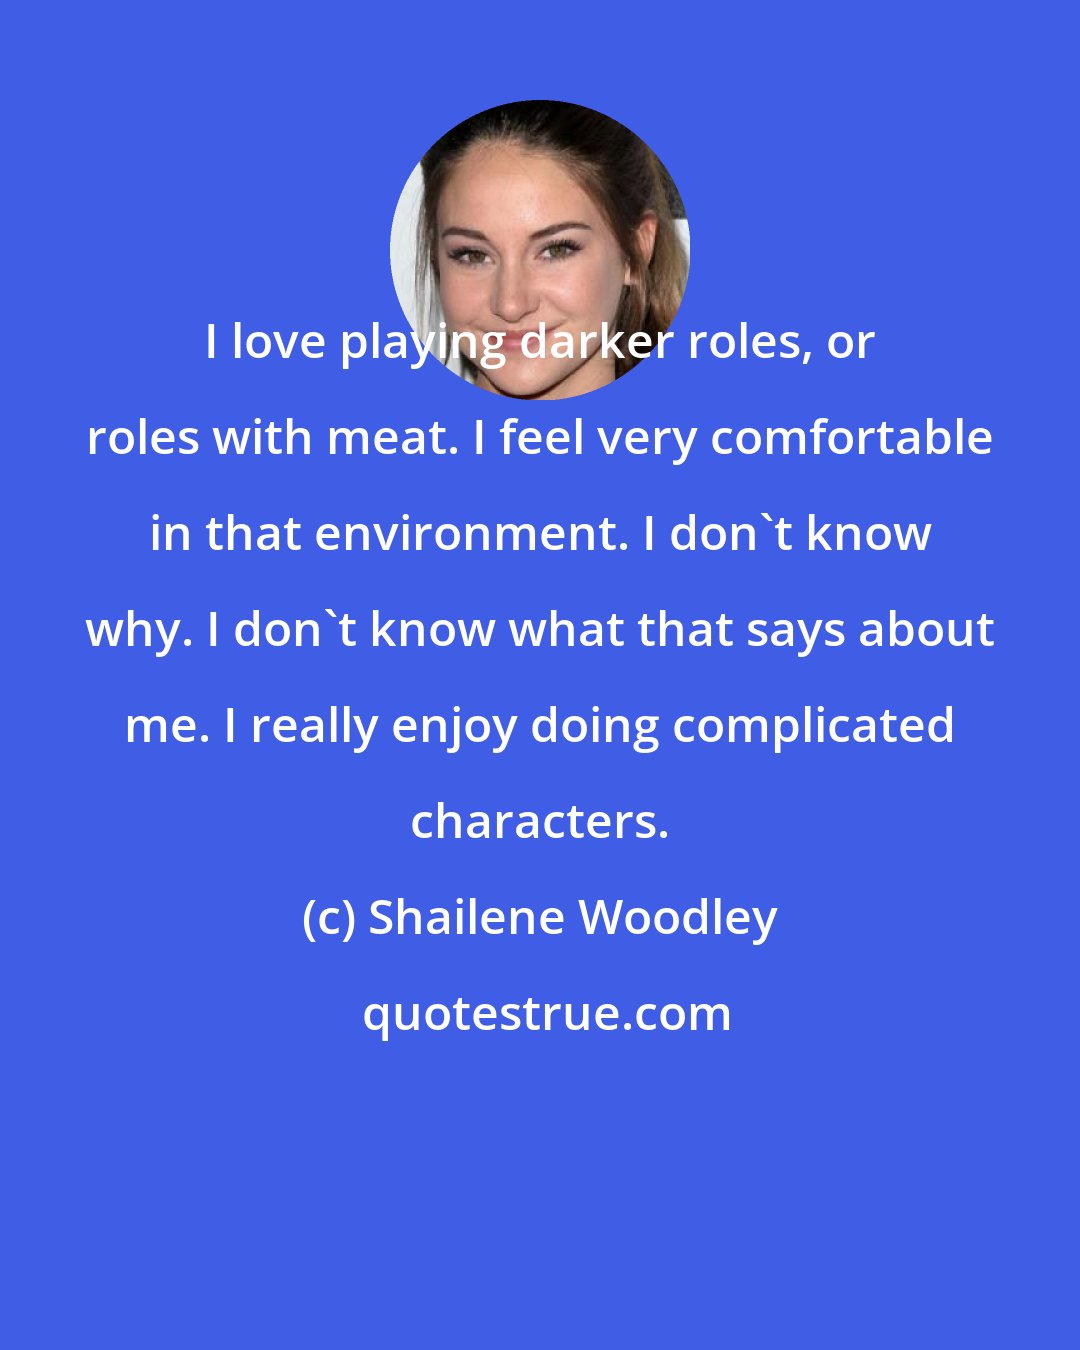 Shailene Woodley: I love playing darker roles, or roles with meat. I feel very comfortable in that environment. I don't know why. I don't know what that says about me. I really enjoy doing complicated characters.